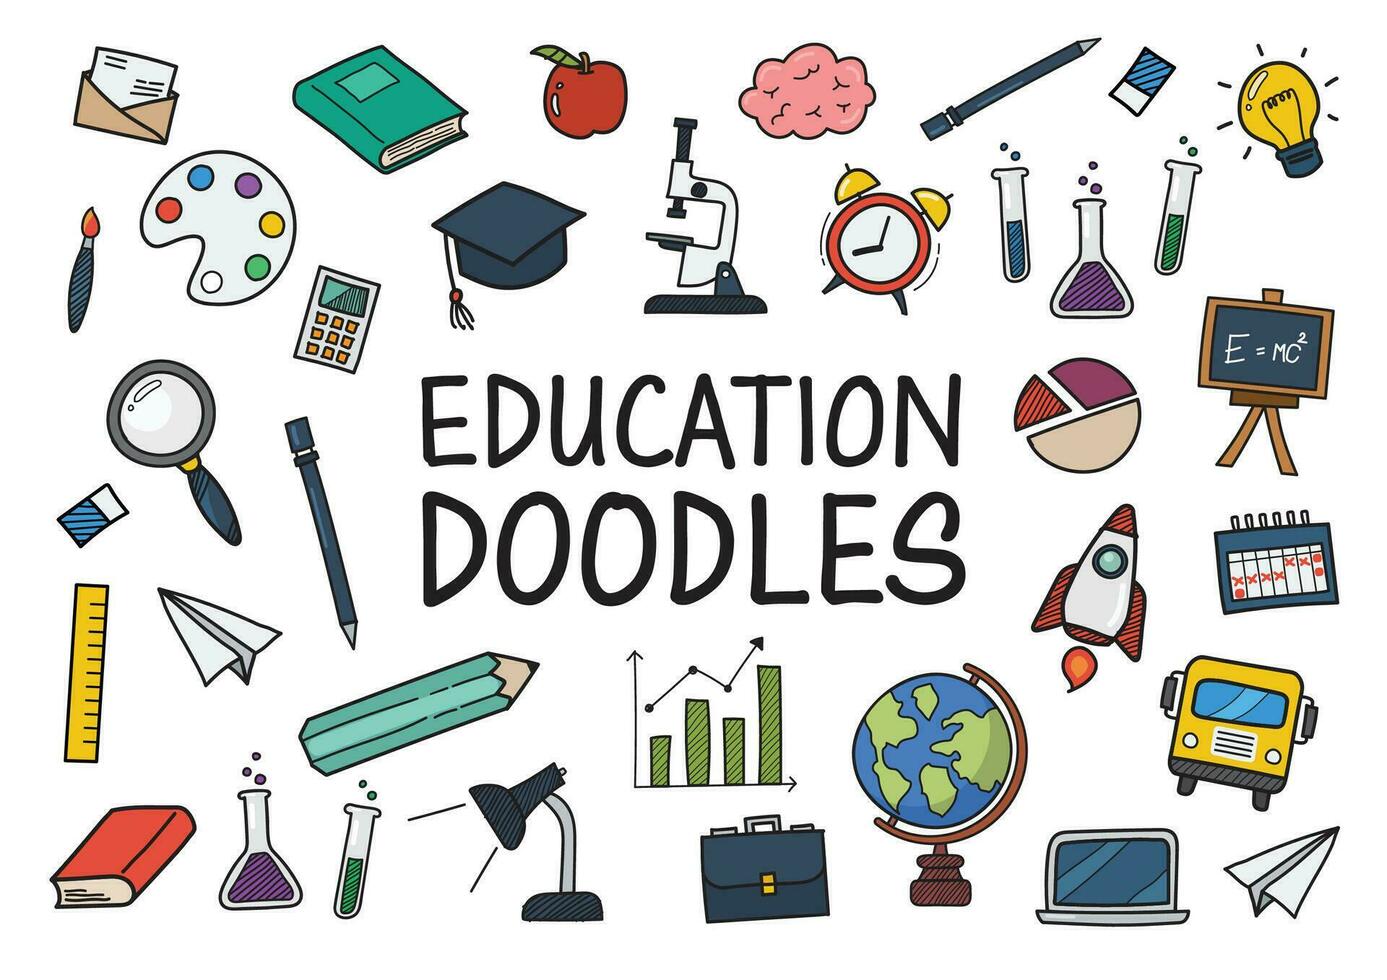 Education doodles color hand drawn icons vector